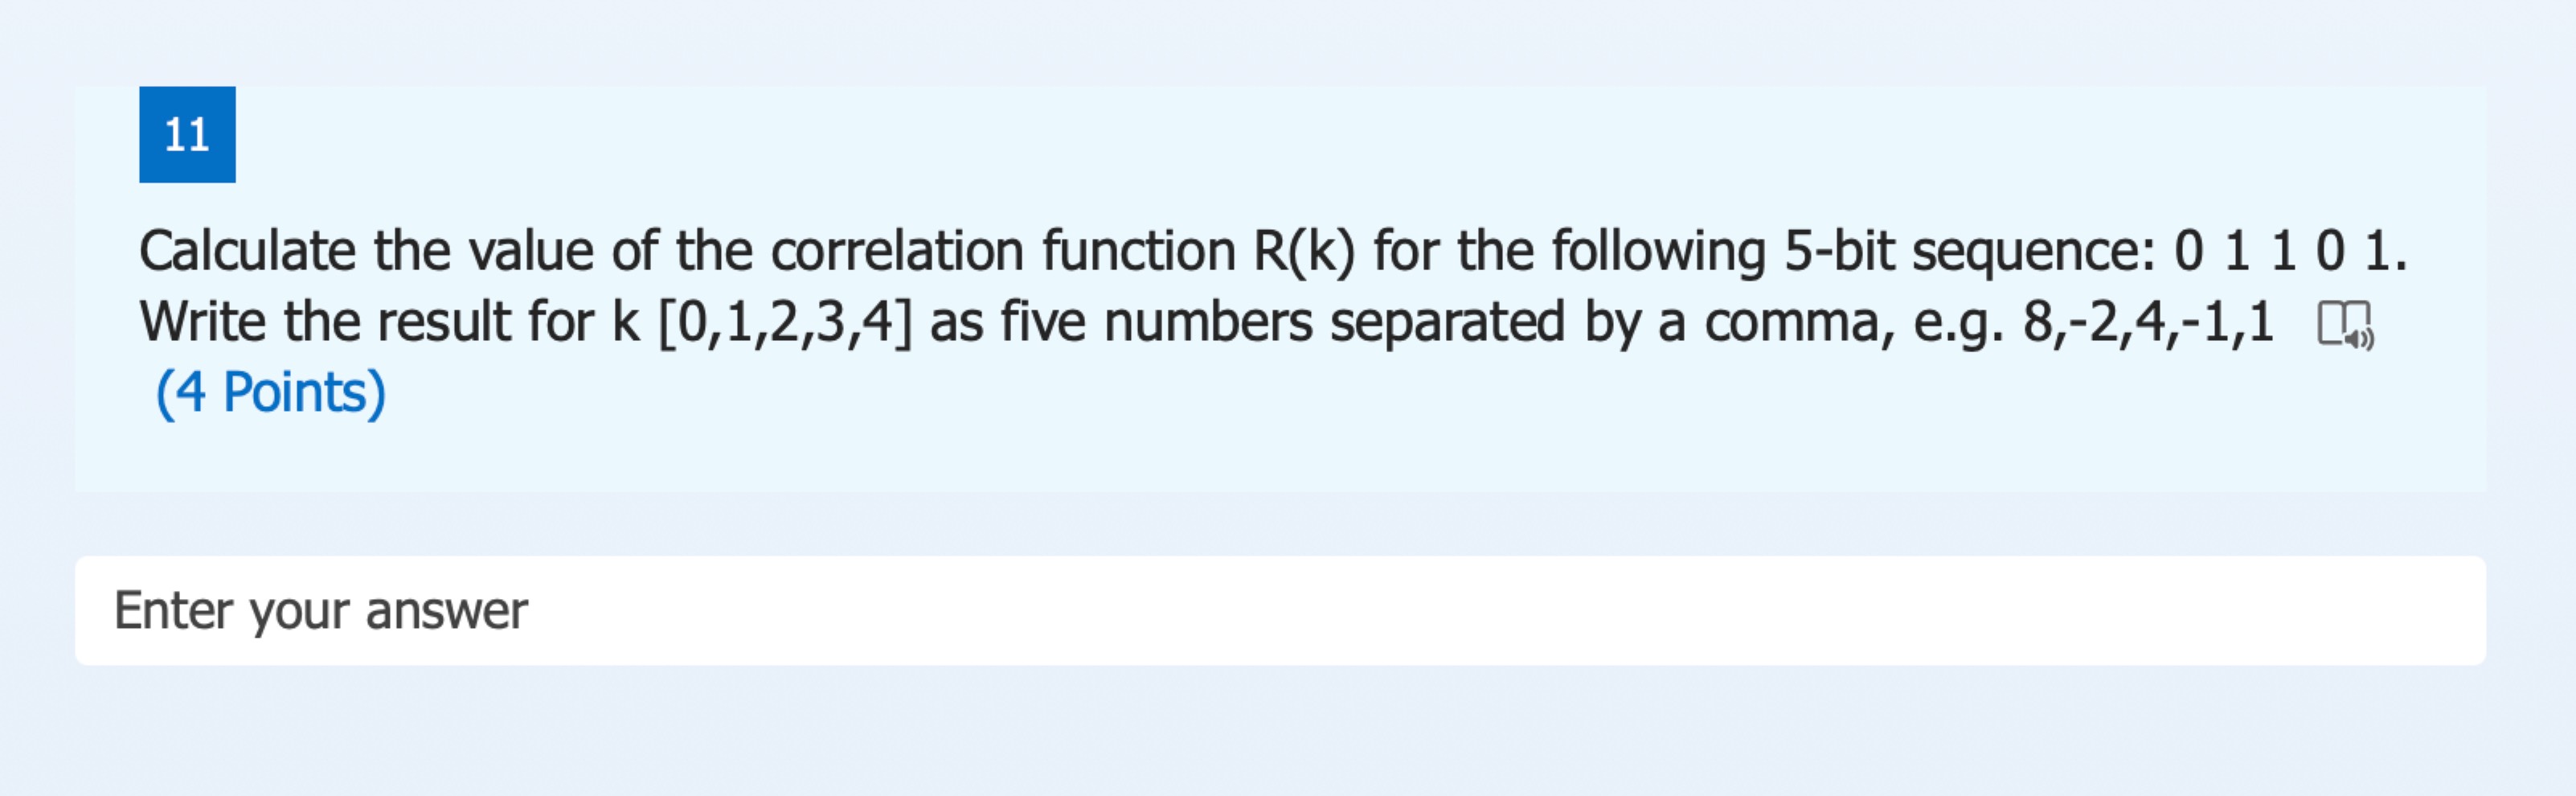 11 Calculate the value of the correlation function R(k) for the following 5-bit sequence: 0 1 1 0 1. Write